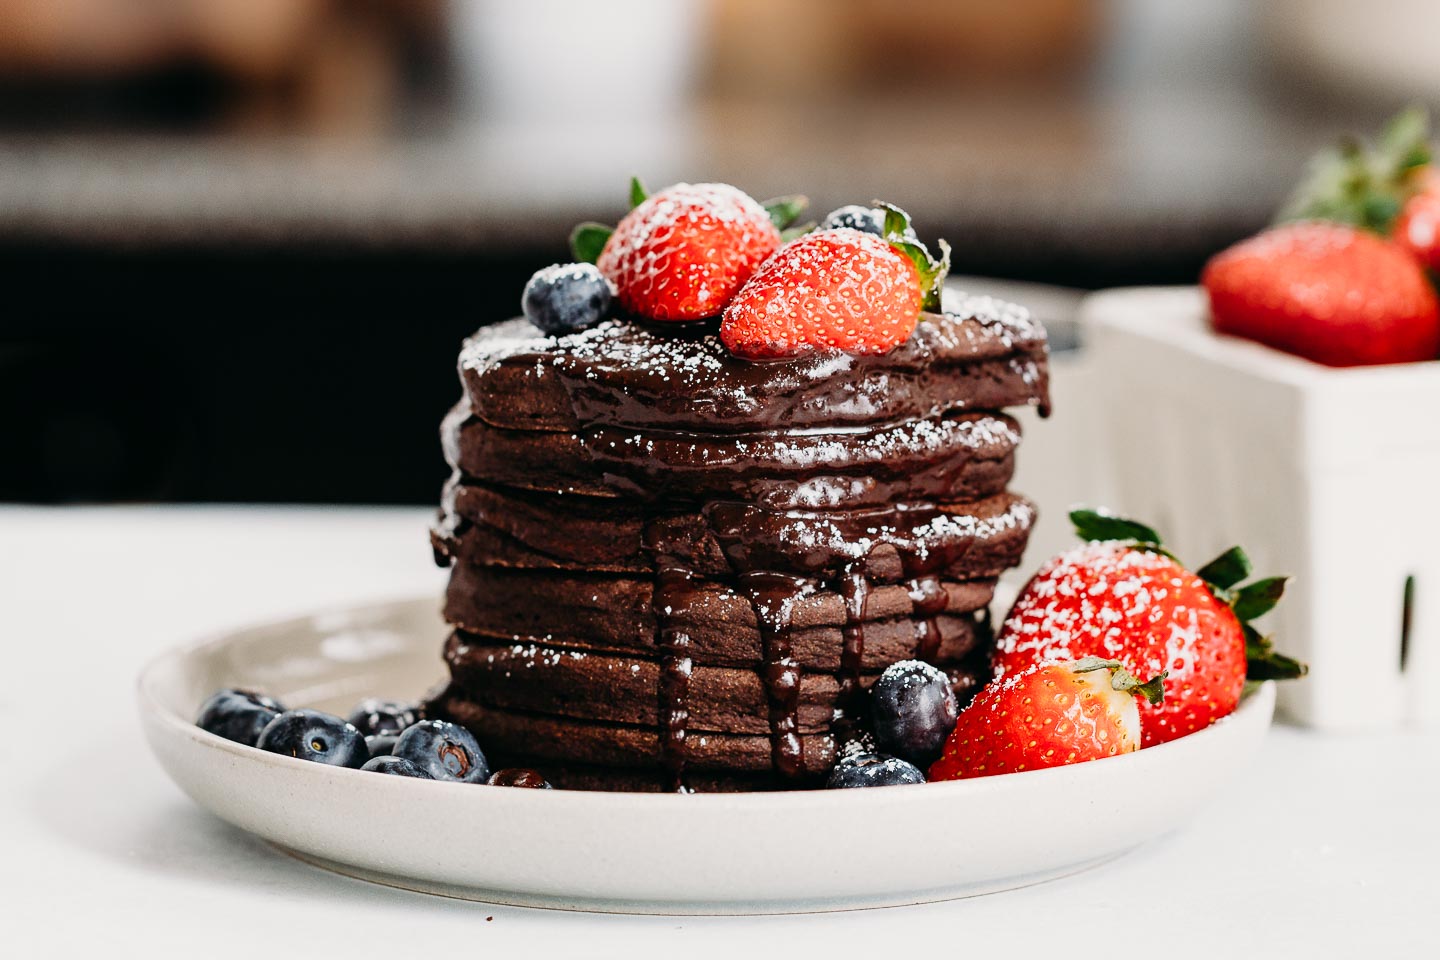 A stack of chocolate pancakes on a plate with syrup.